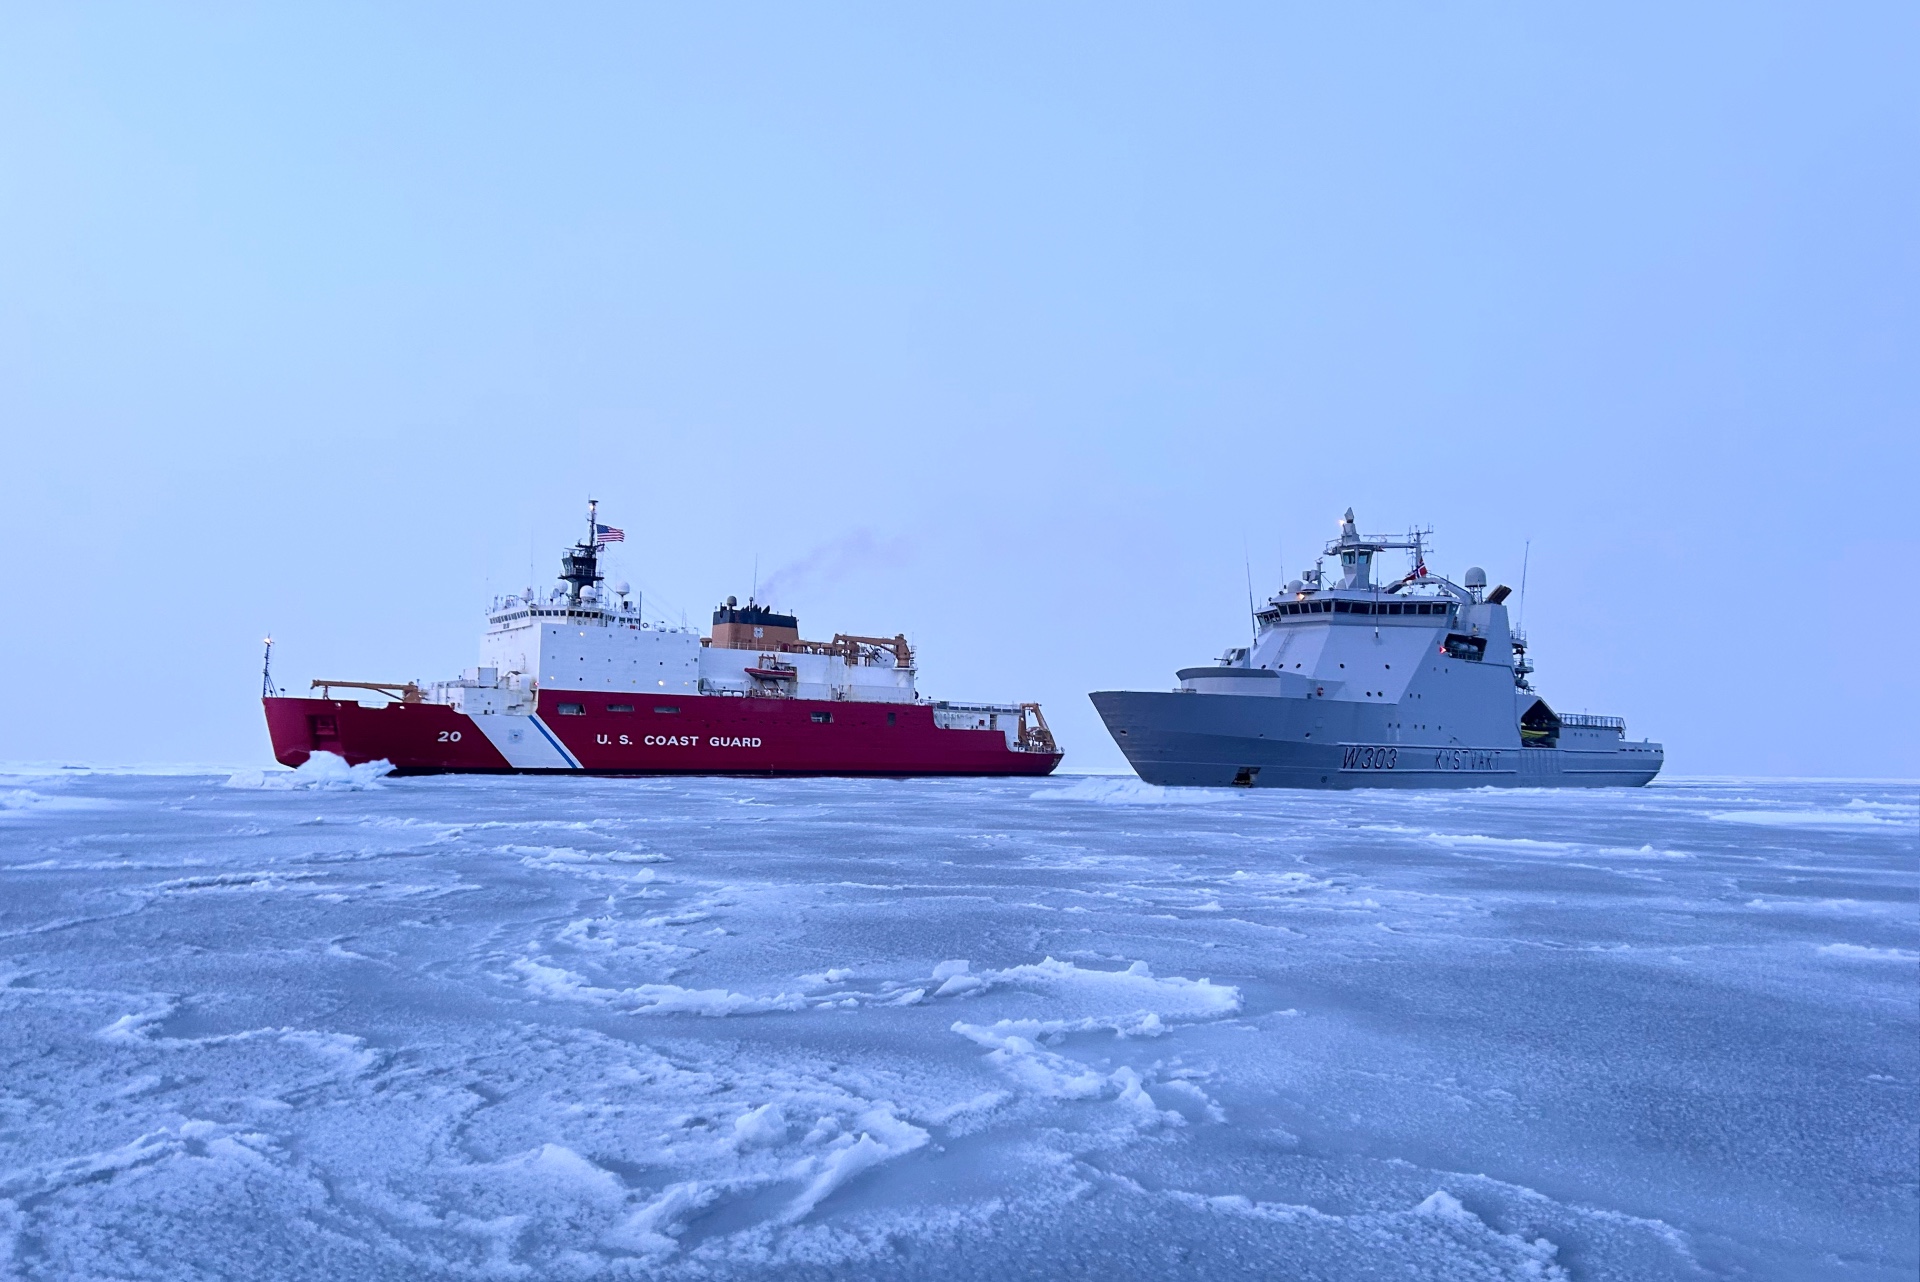 Nuclear icebreakers and Northern Sea Route